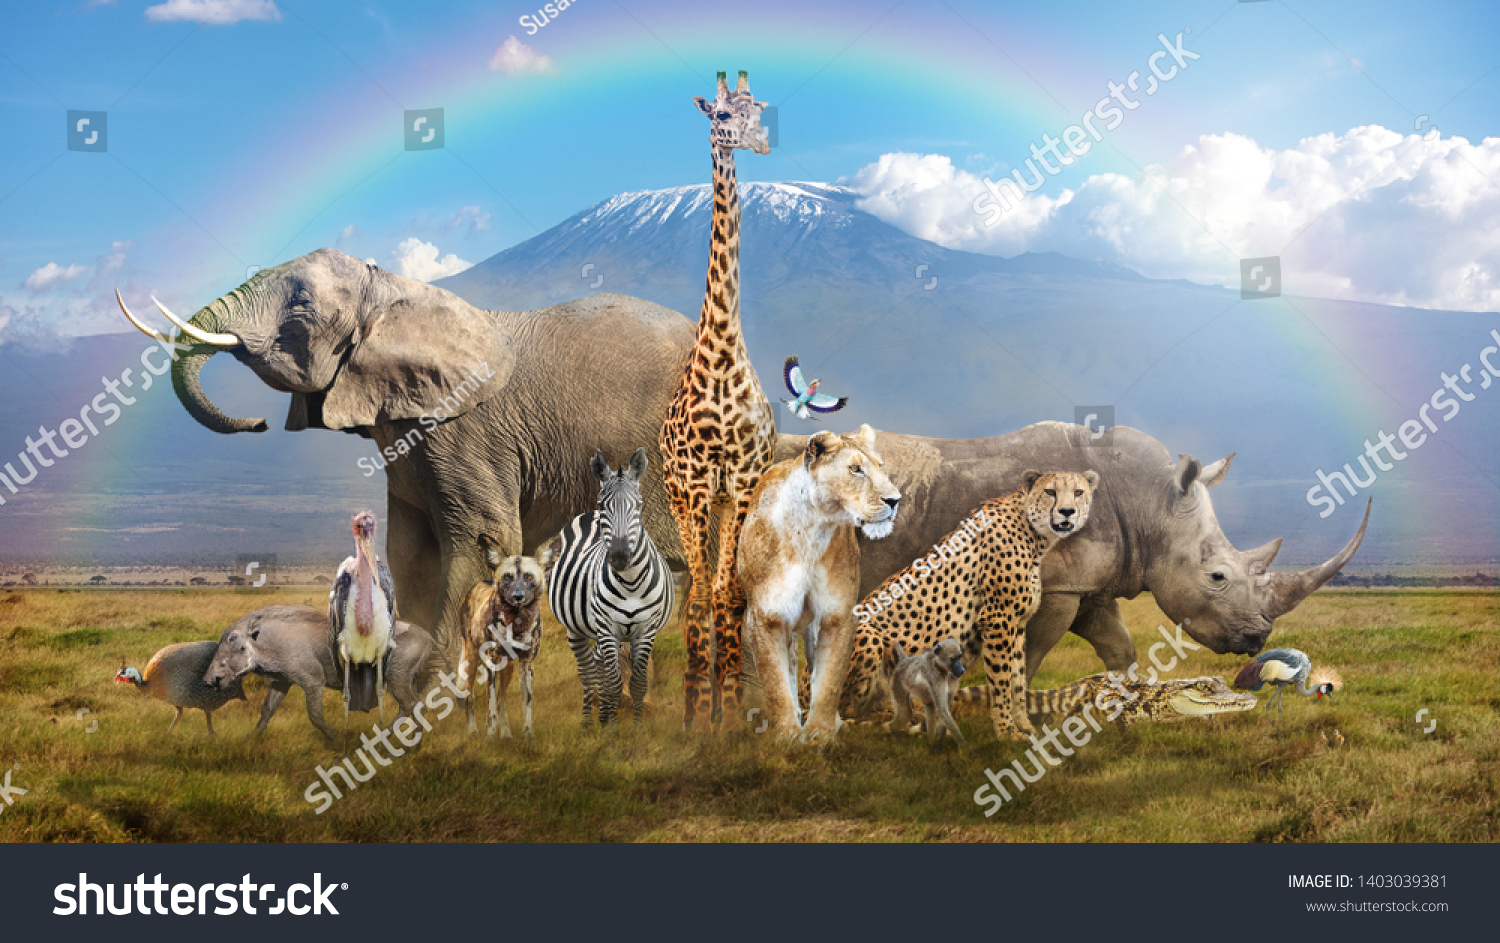 Large group of African wildlife animals in a magical bream scene with snow-capped Mt Kilimanjaro in background and rainbow overhead #1403039381